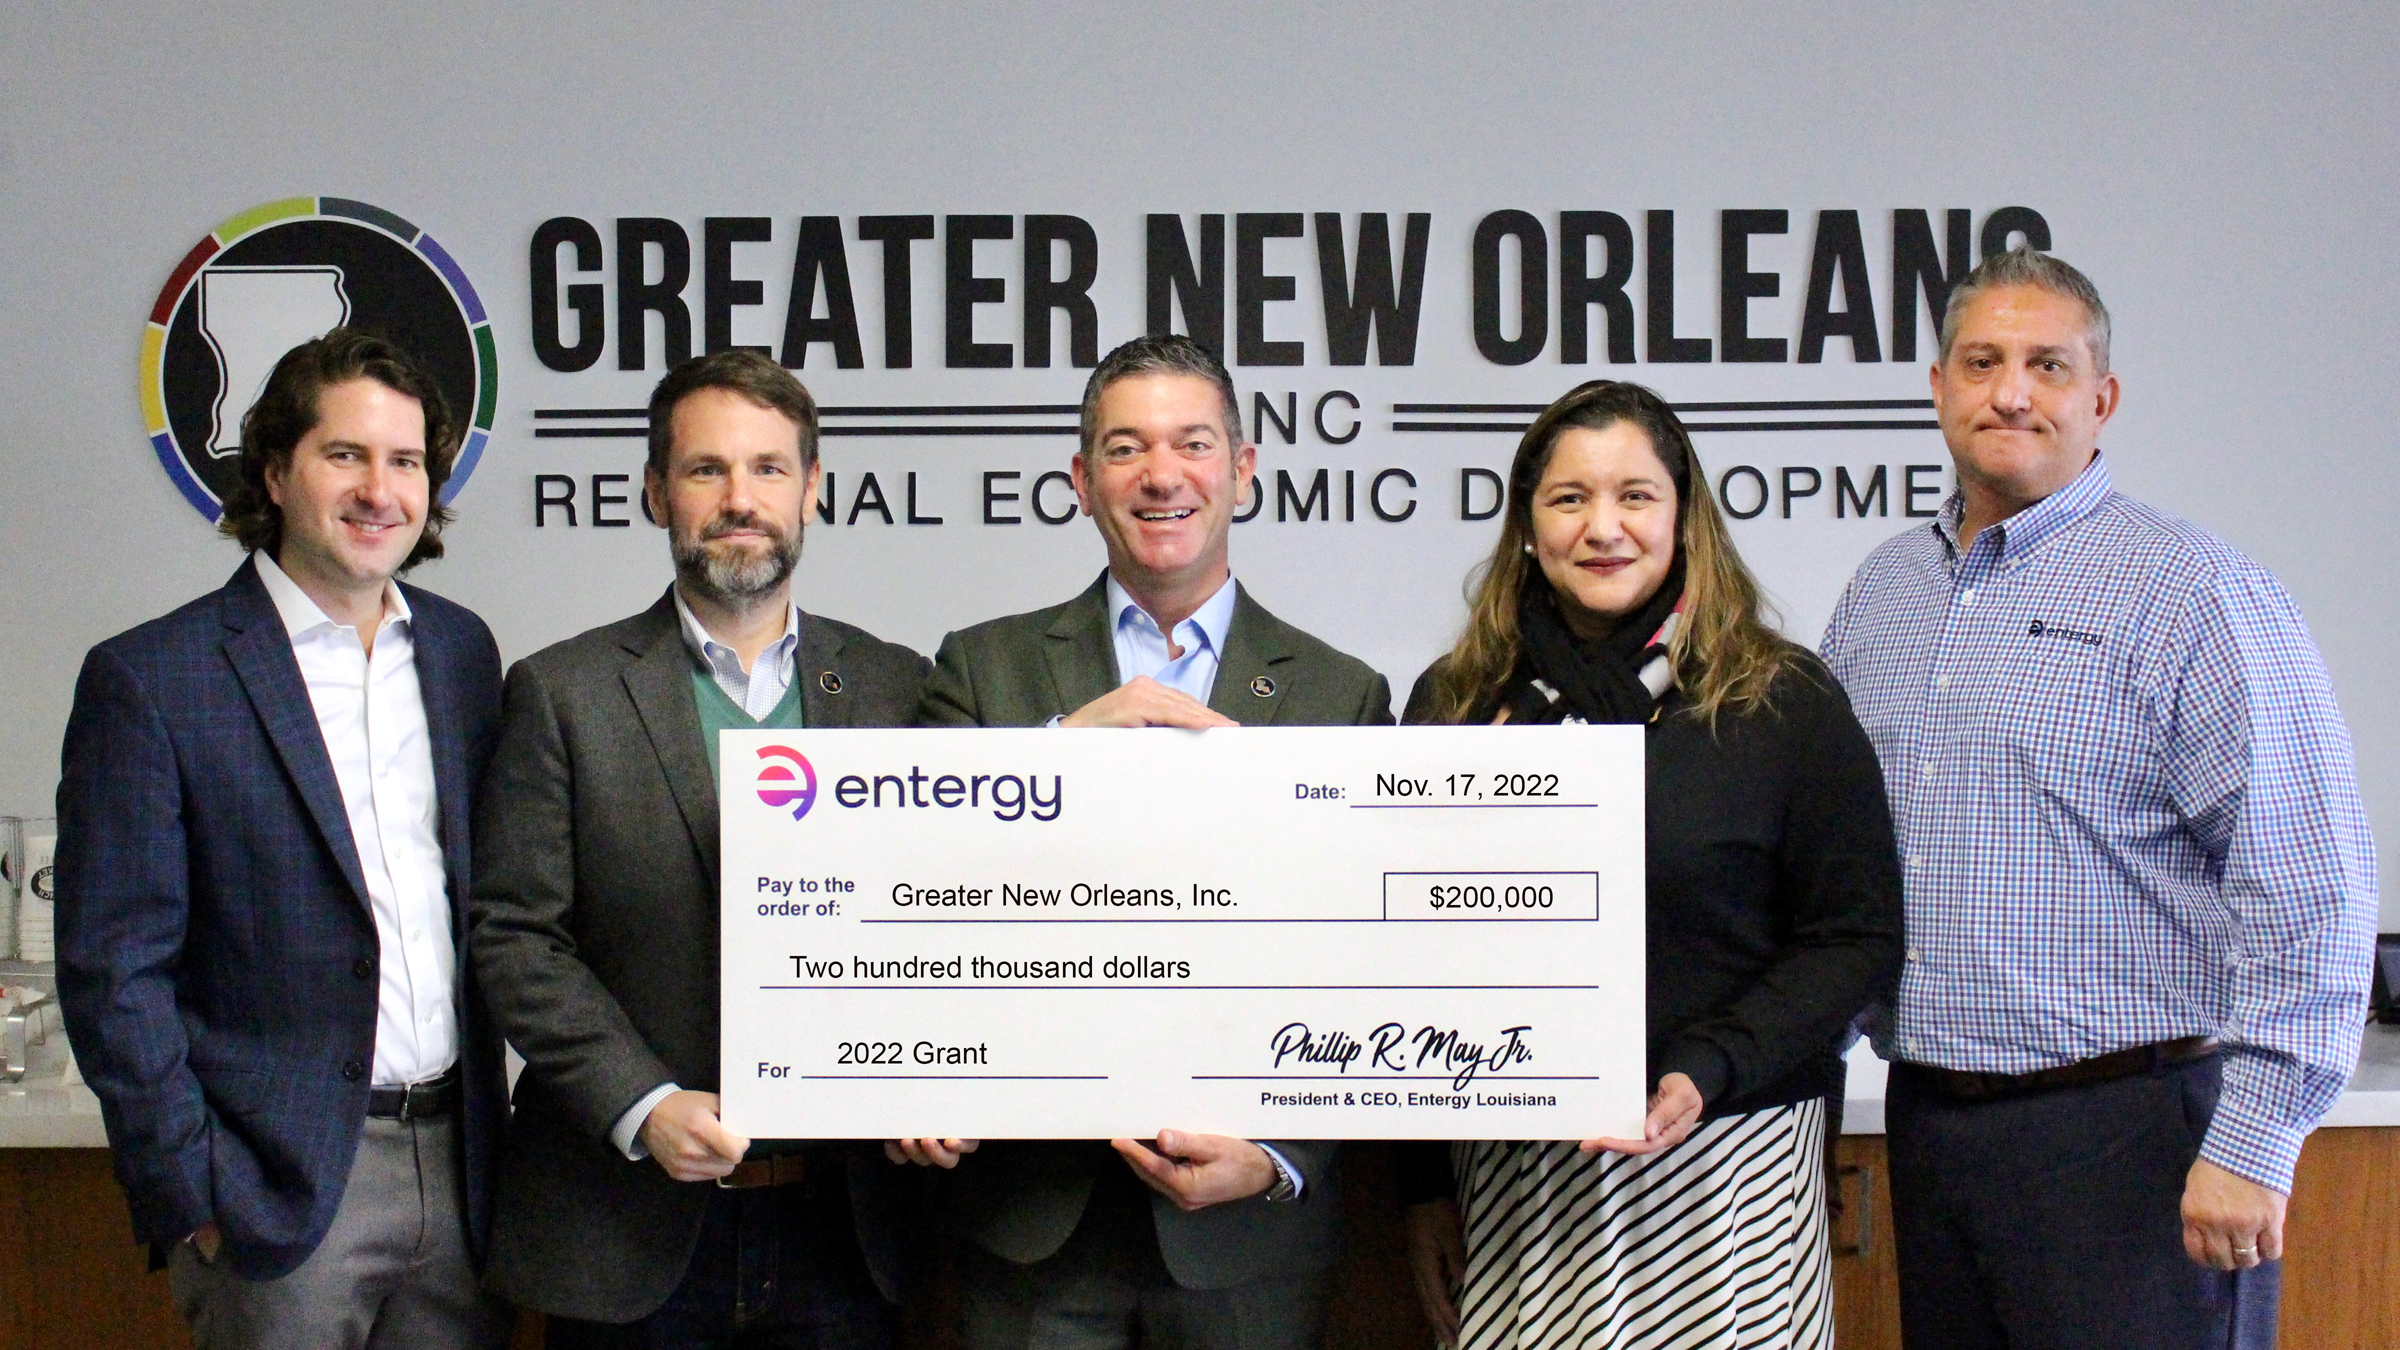 Pictured, from left, are Andrew Jacques, Entergy New Orleans business and economic development project manager; Josh Fleig, GNO, Inc. vice president of business development; Michael Hecht, GNO, Inc. president and CEO; Ana Gale-Orellana, Entergy Louisiana business and economic development project manager; and Perry Pertuit, Entergy Louisiana business and economic development manager.